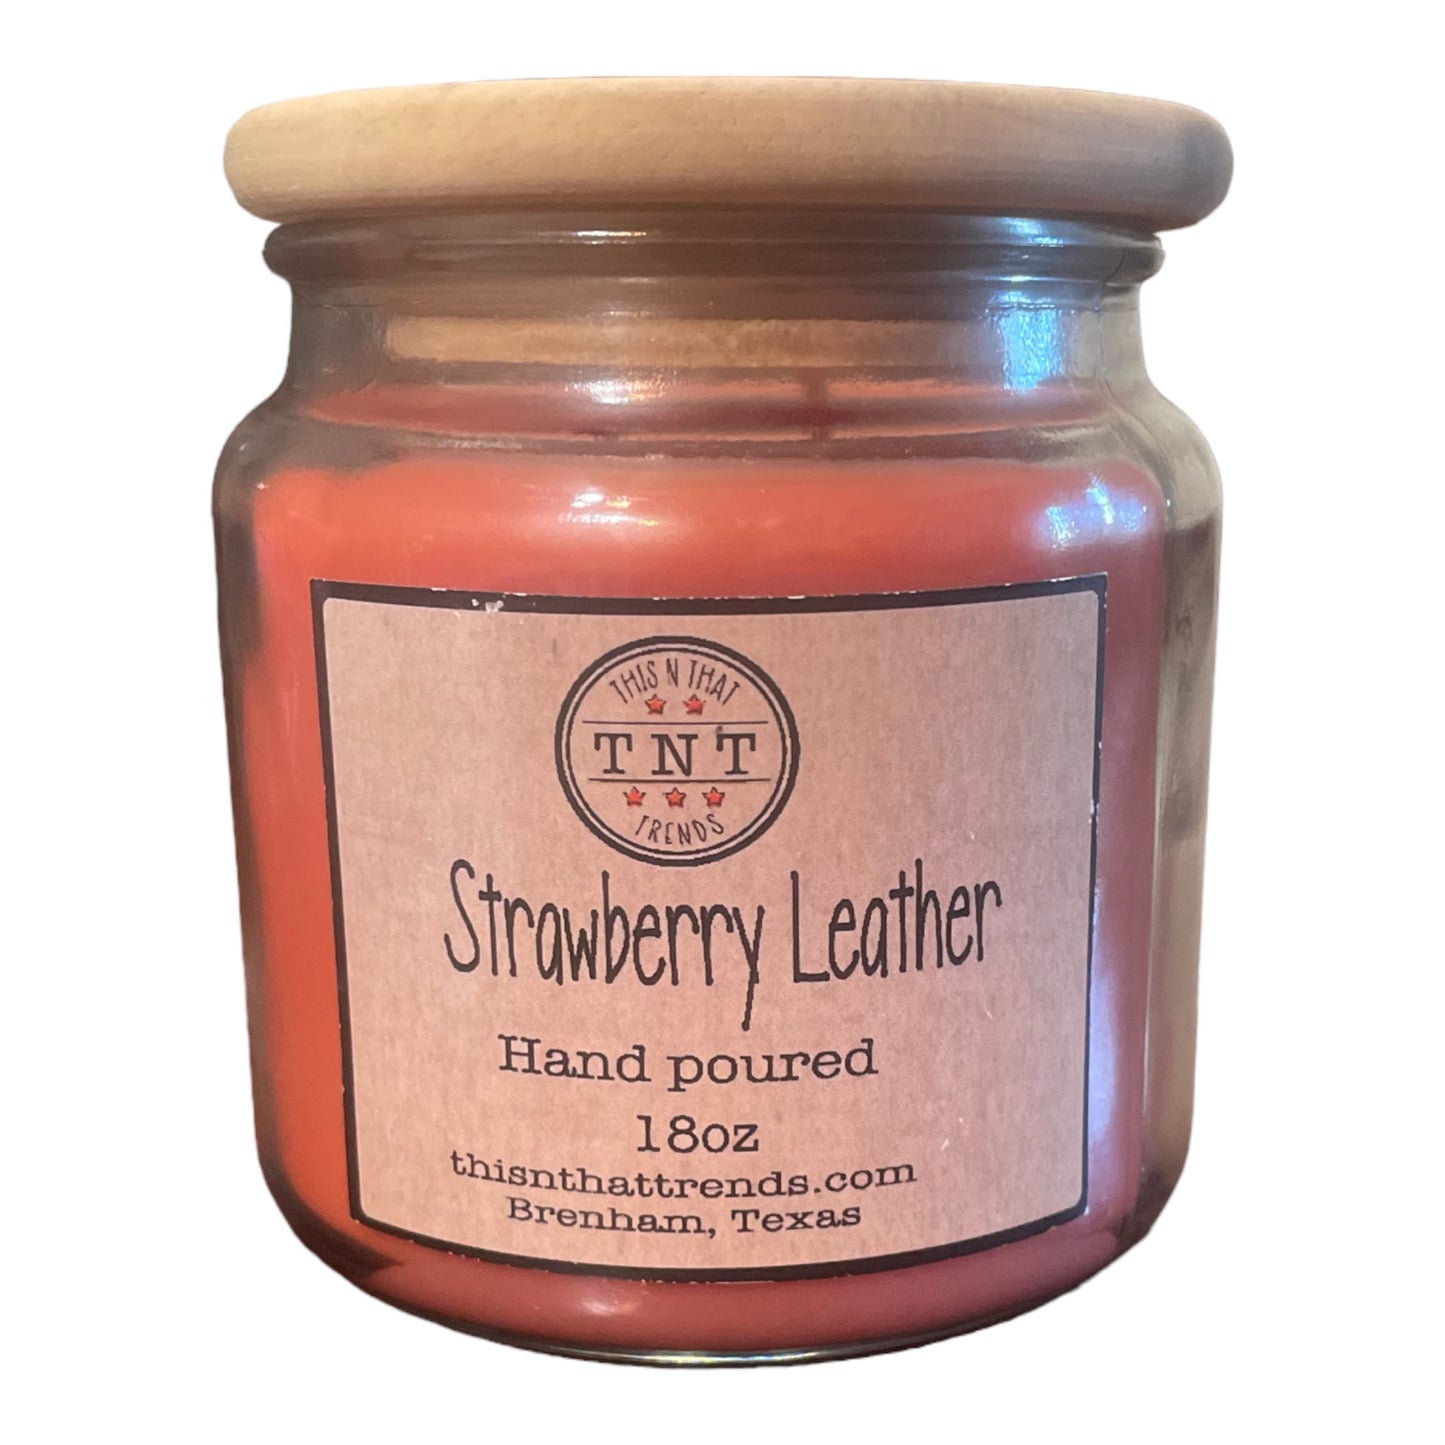 Strawberry Leather